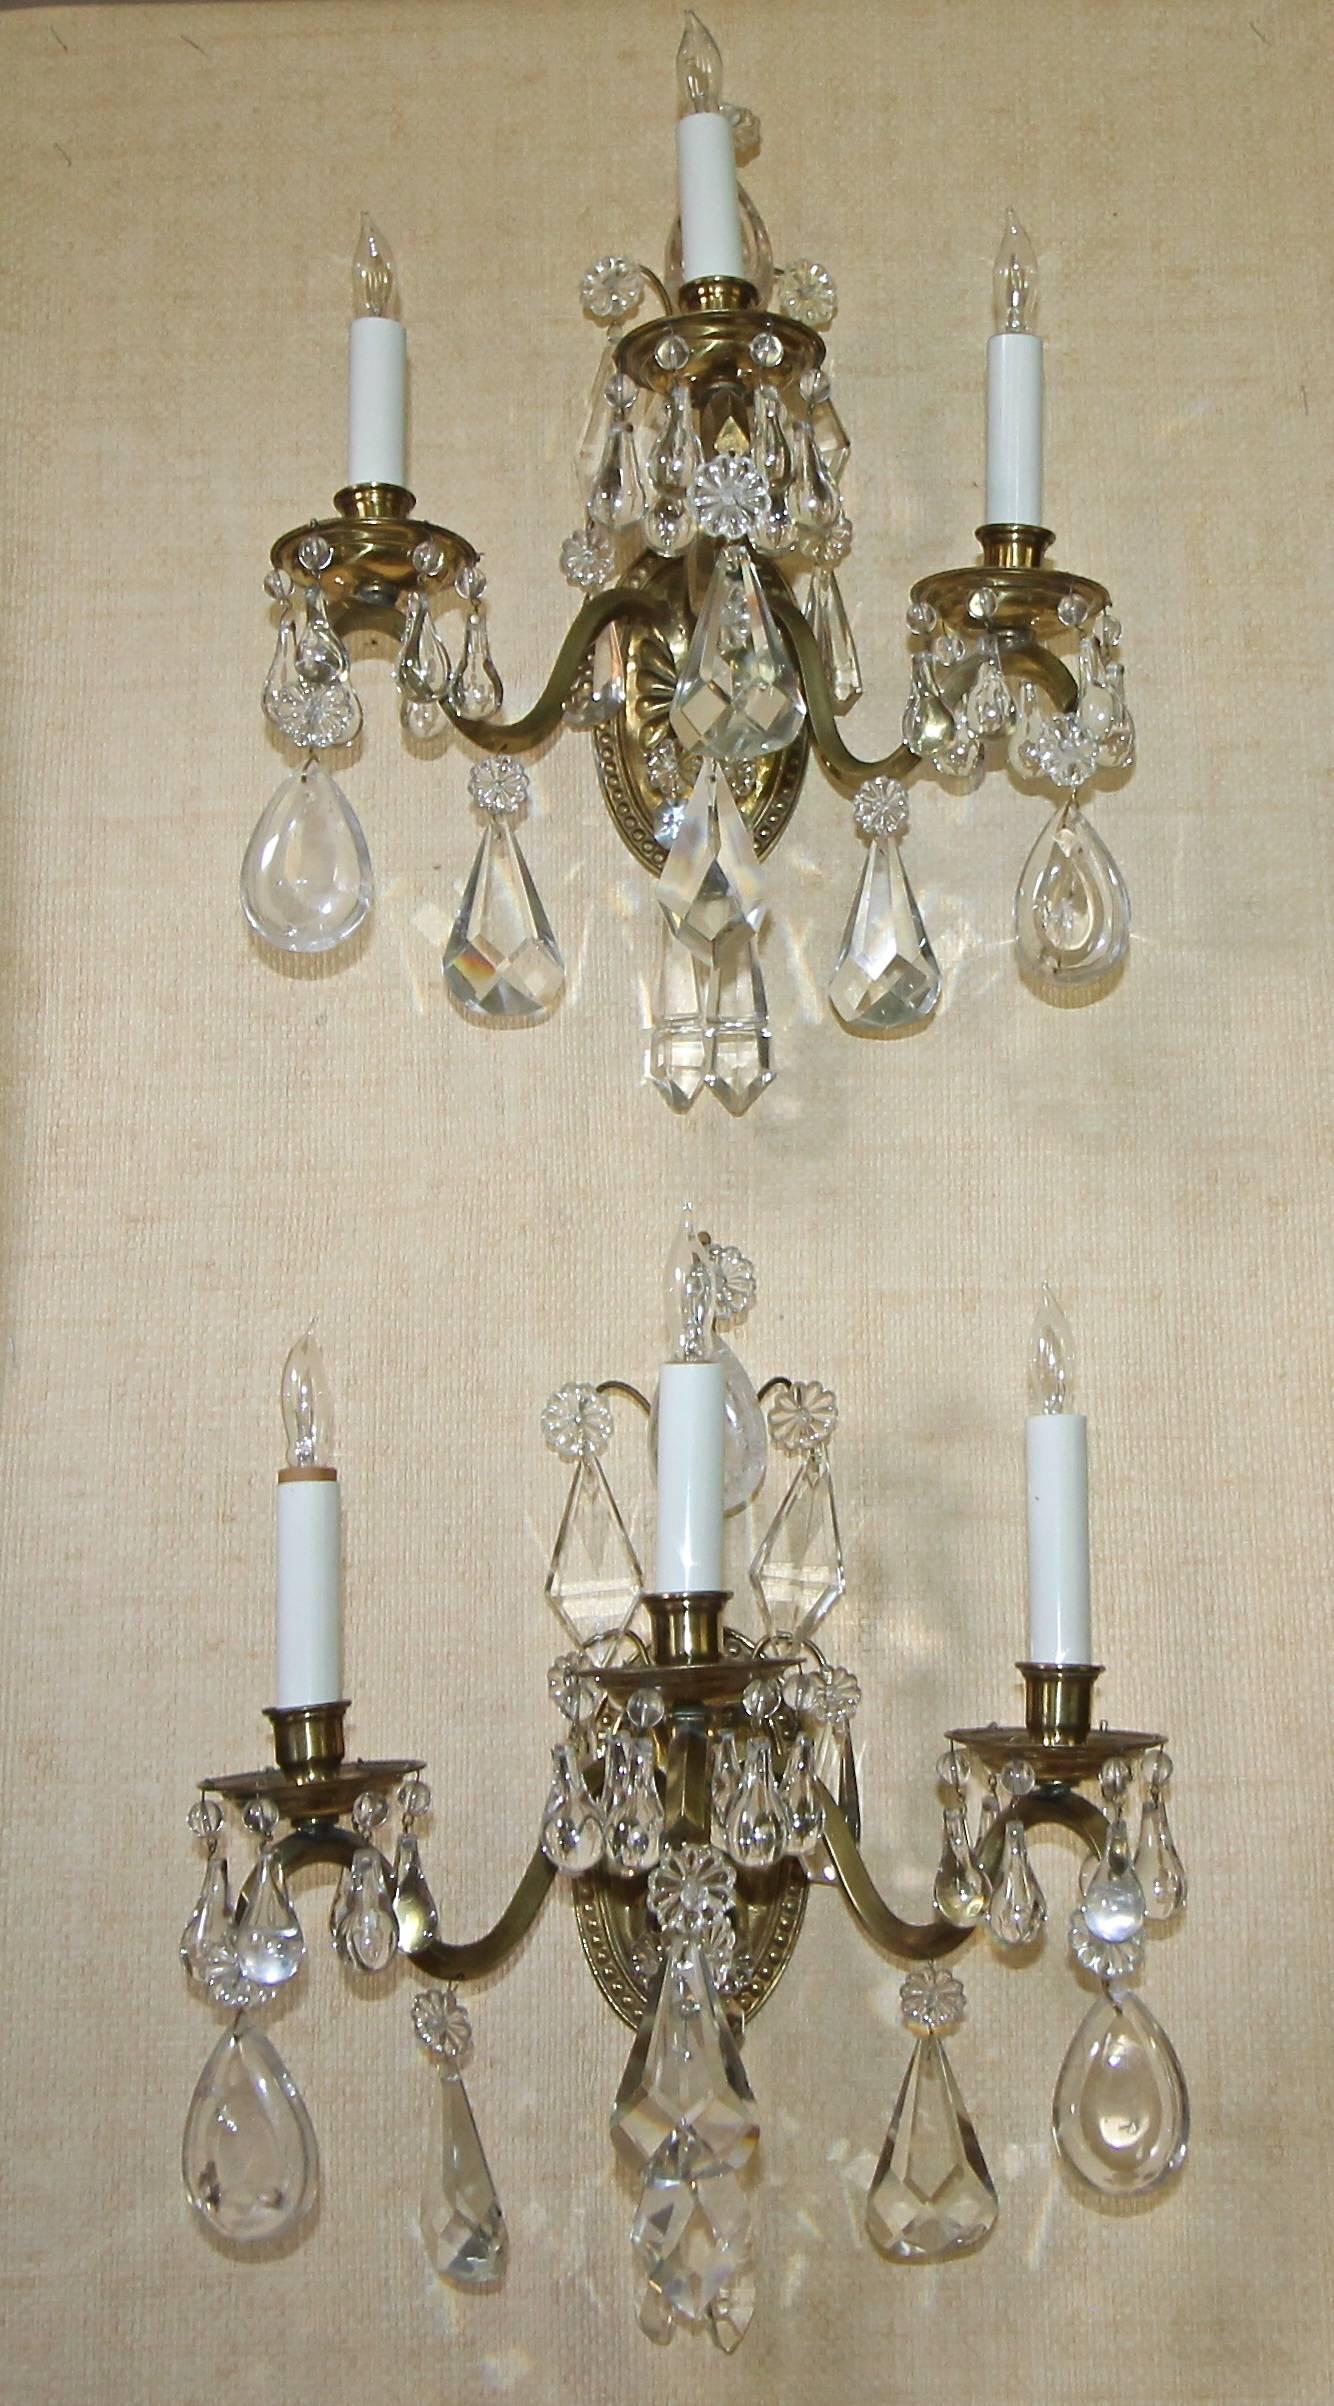 Pair of French Rock Crystal Brass Wall Sconces In Good Condition For Sale In Dallas, TX